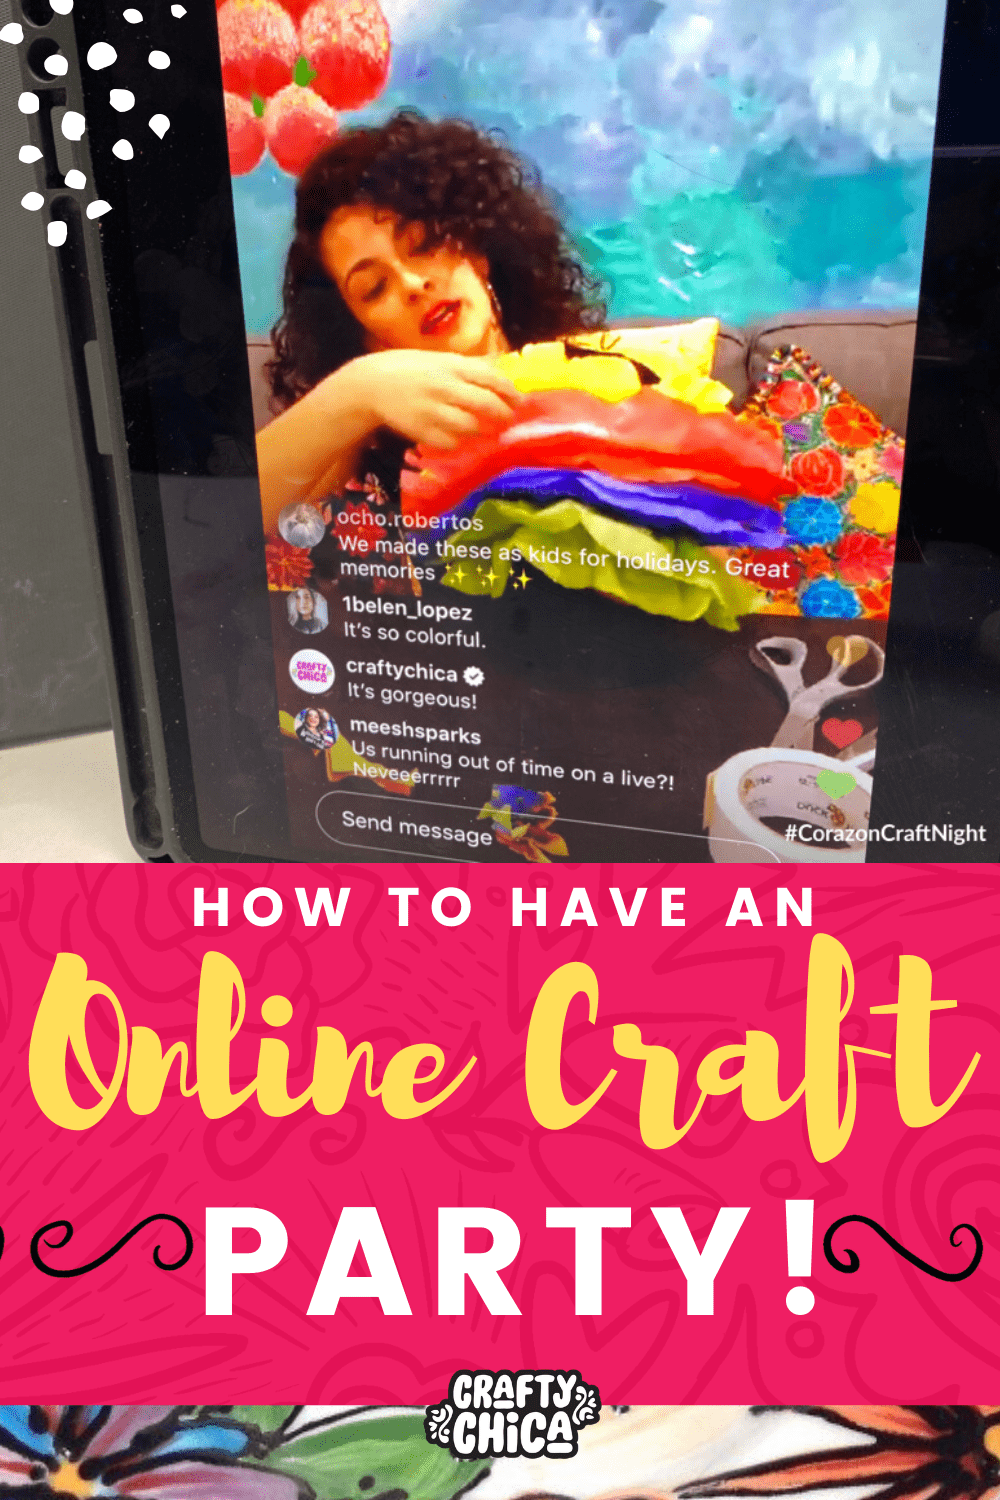 How to host an online craft party #craftychica #onlinepartyidea